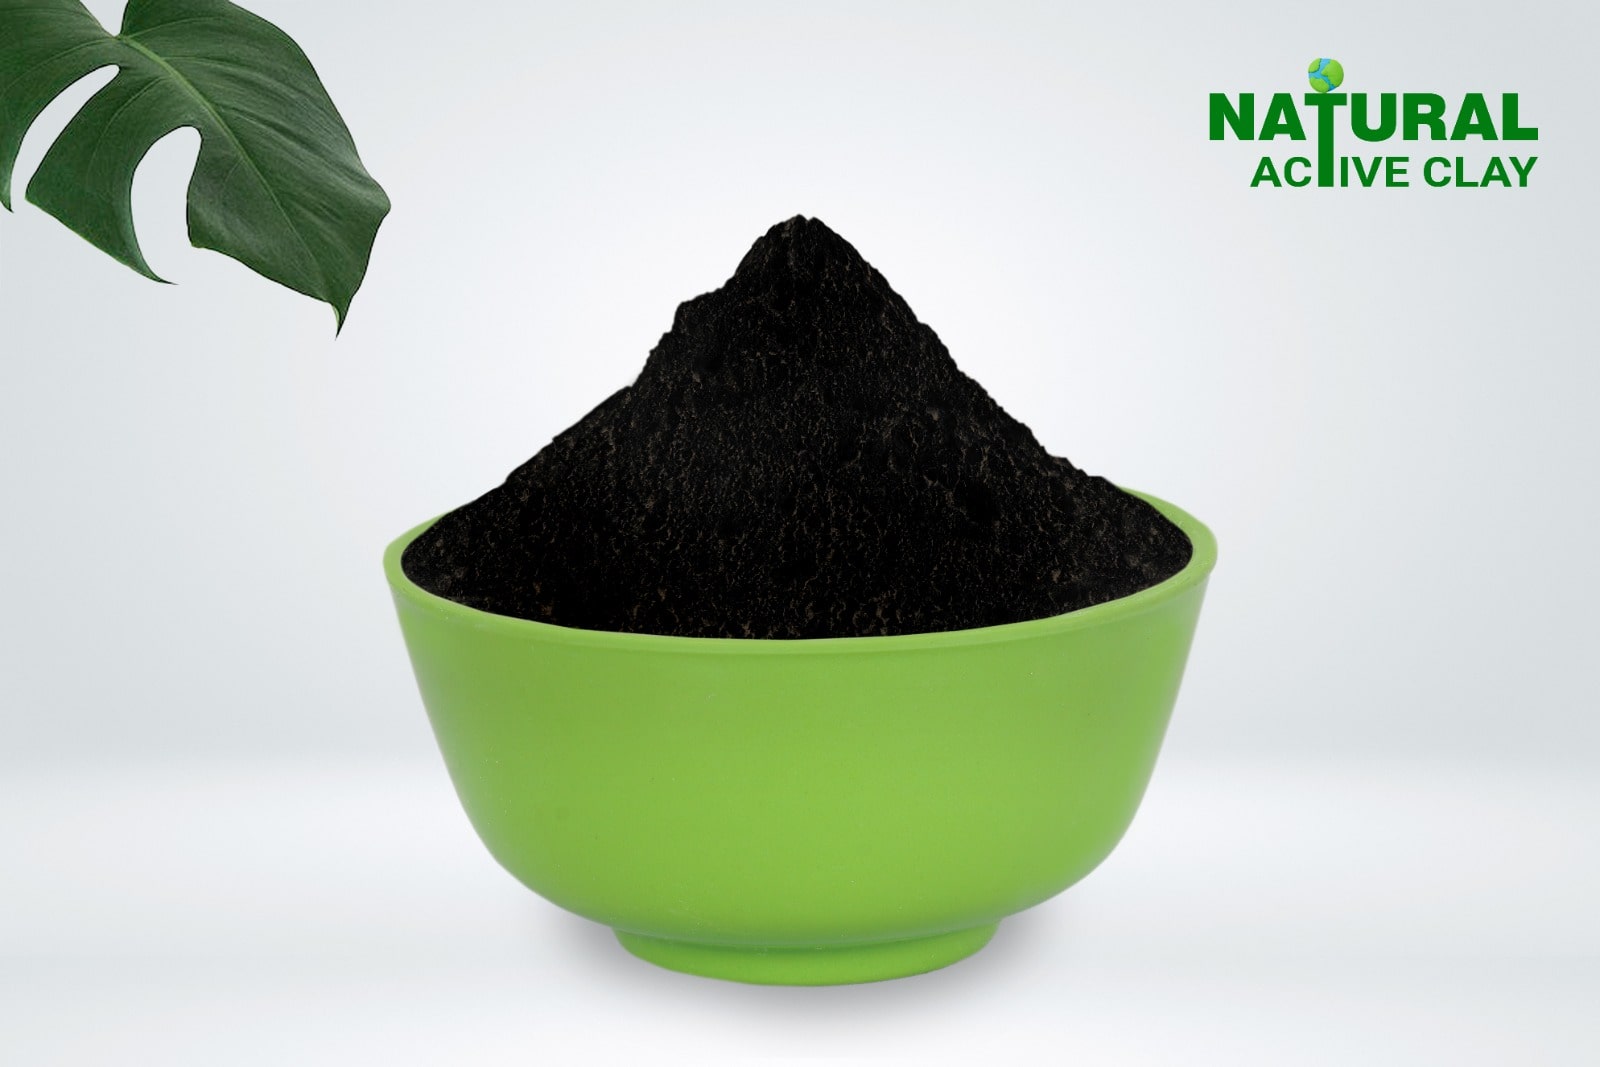 Activated Carbon Manufacturers | Natural Active Clay